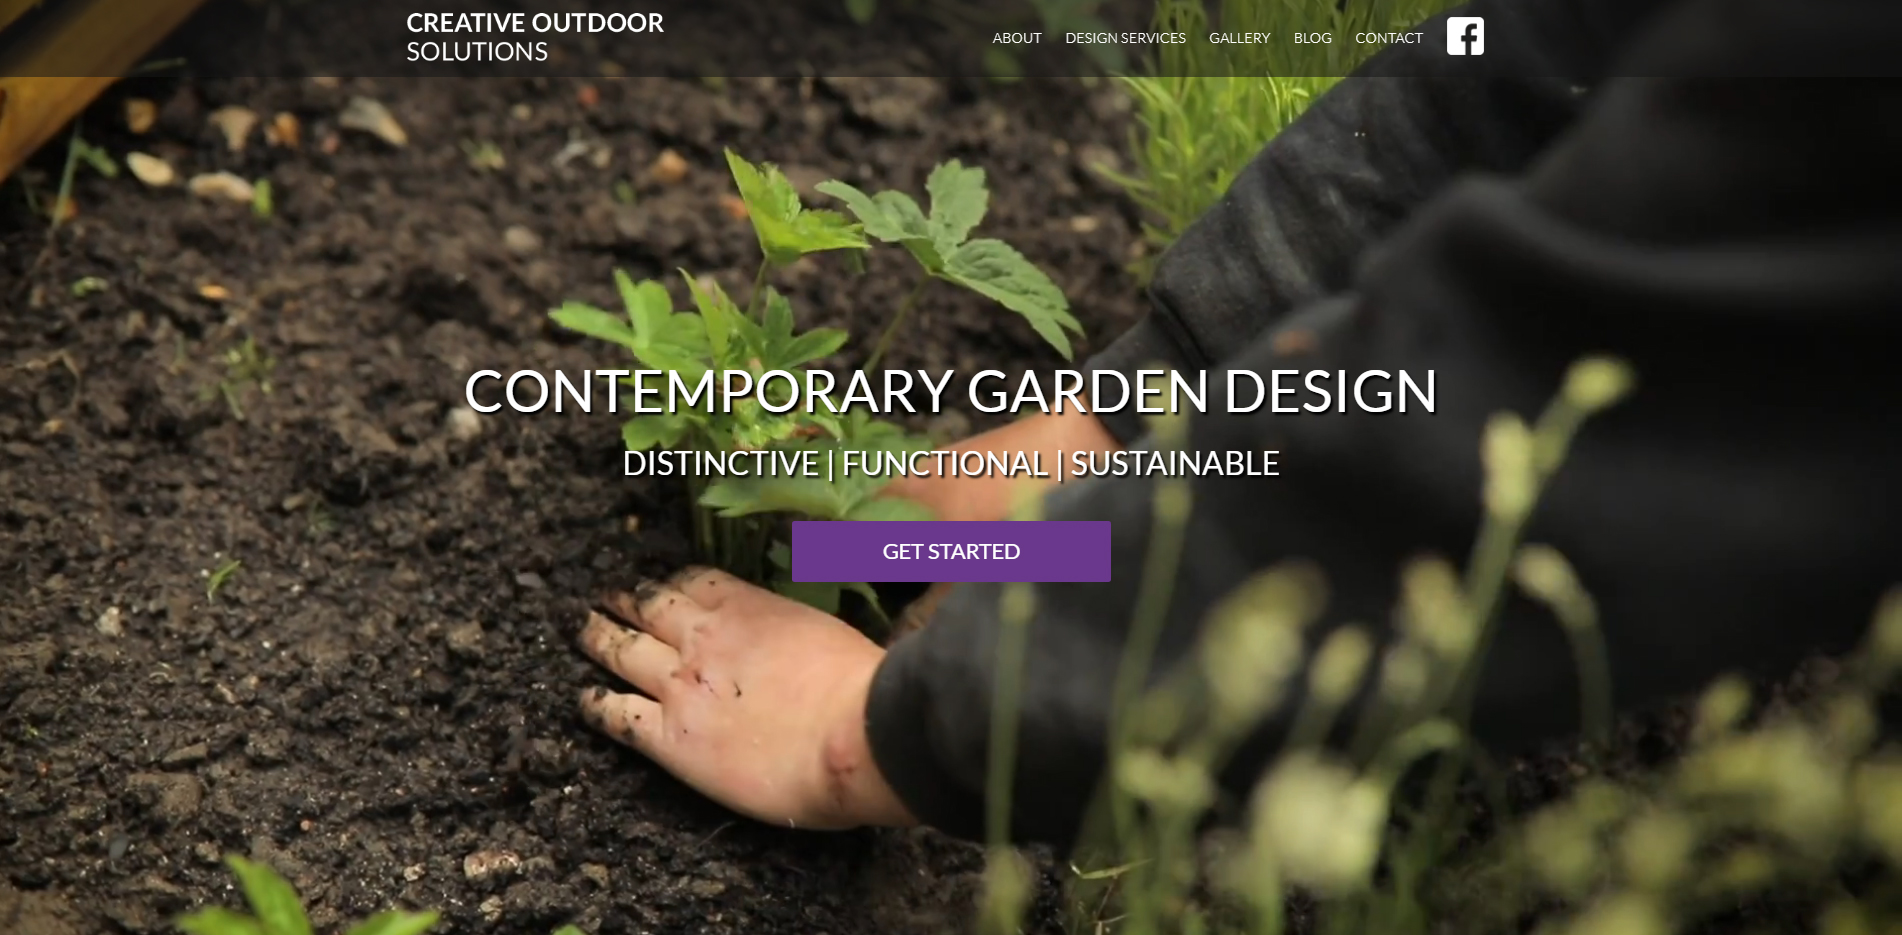 Creative Outdoor Solutions inner page example